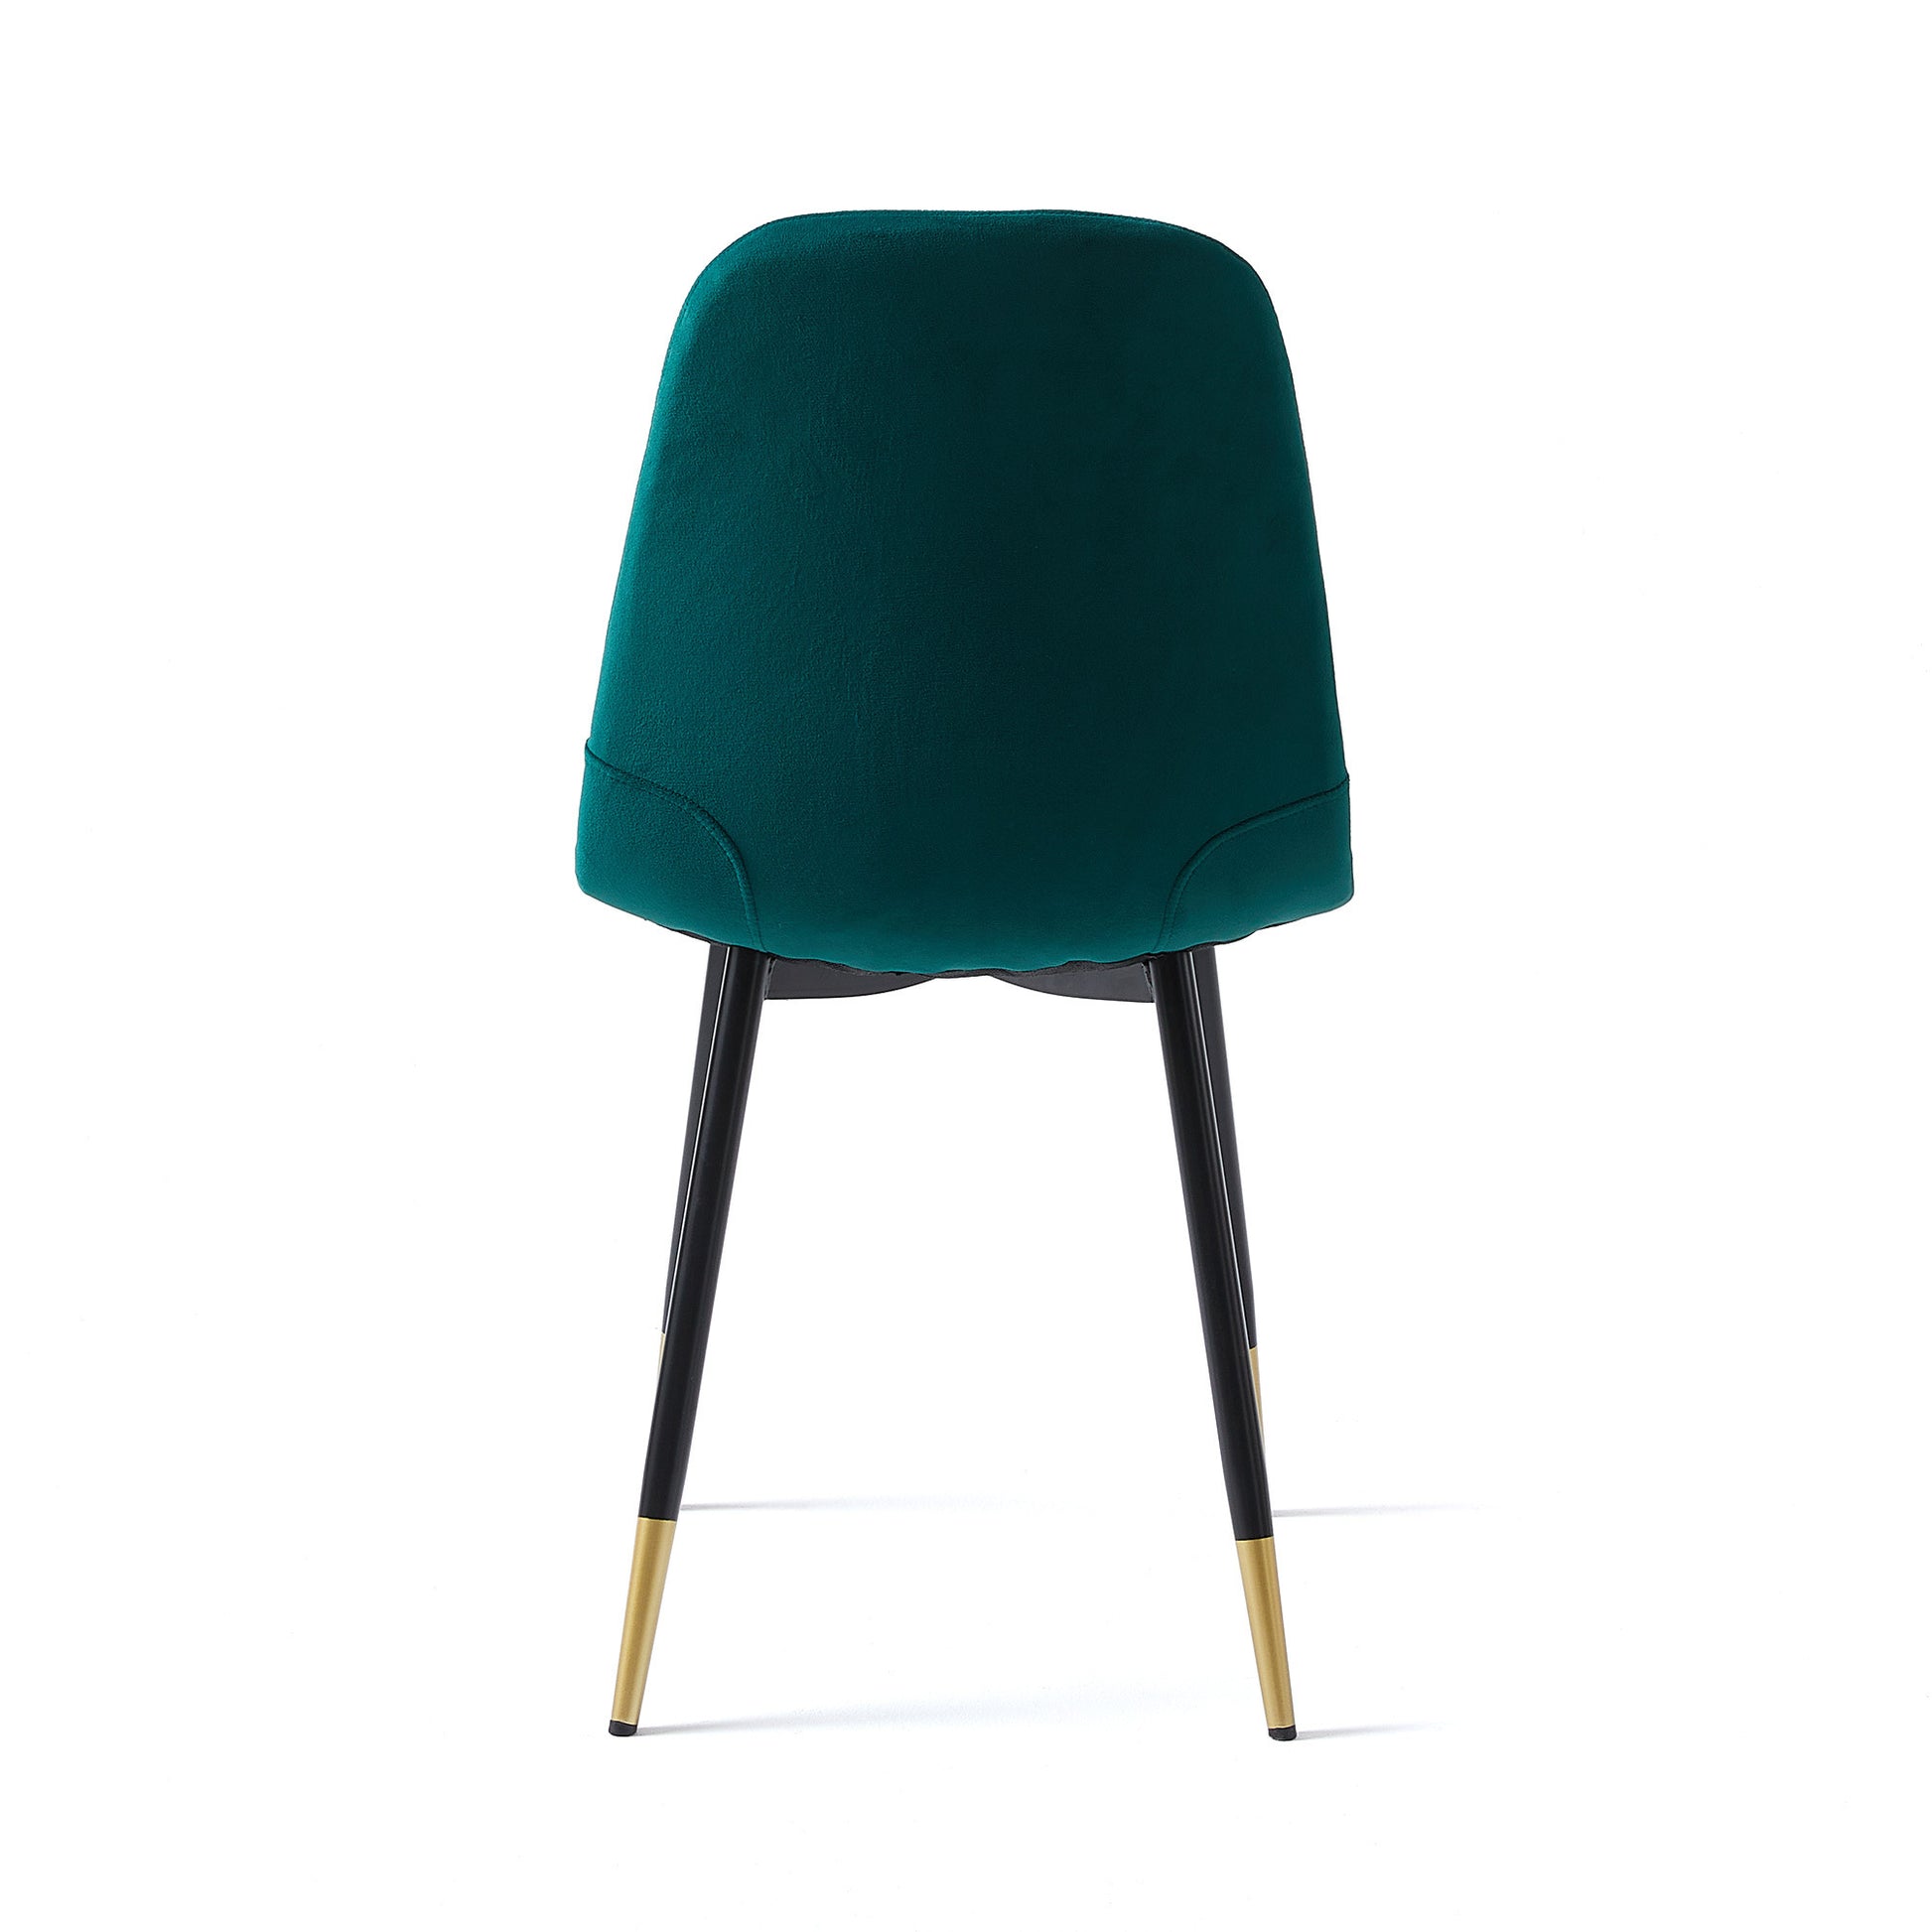 Dark Green Velvet Tufted Accent Chairs with Gold Metal Legs, Modern Dining Chairs for Living Room,Set of 4